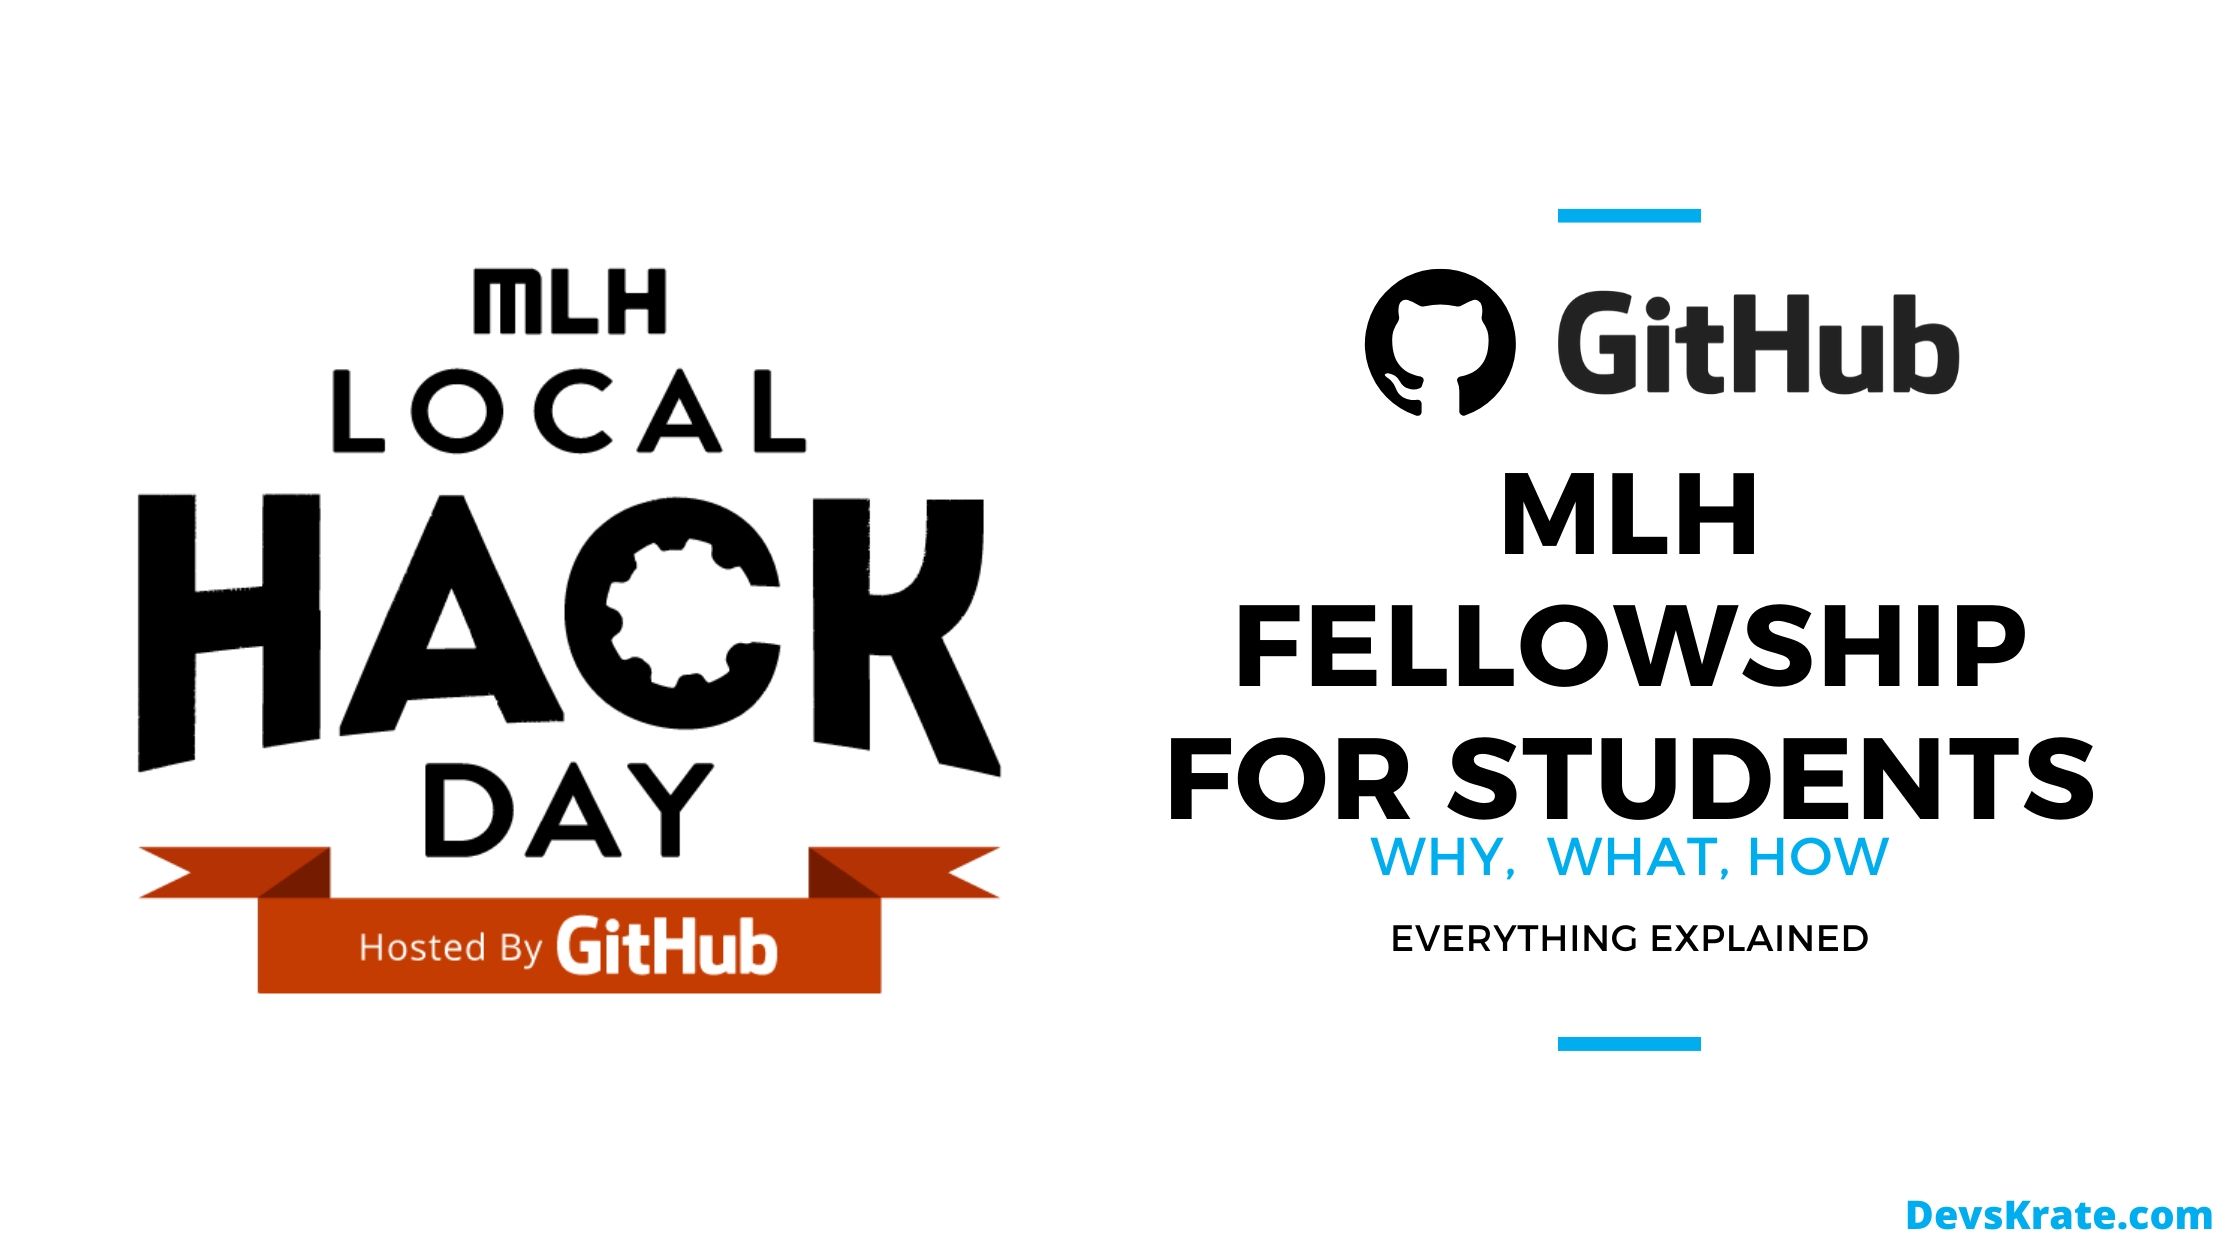 Github announced the MLH Fellowship for students